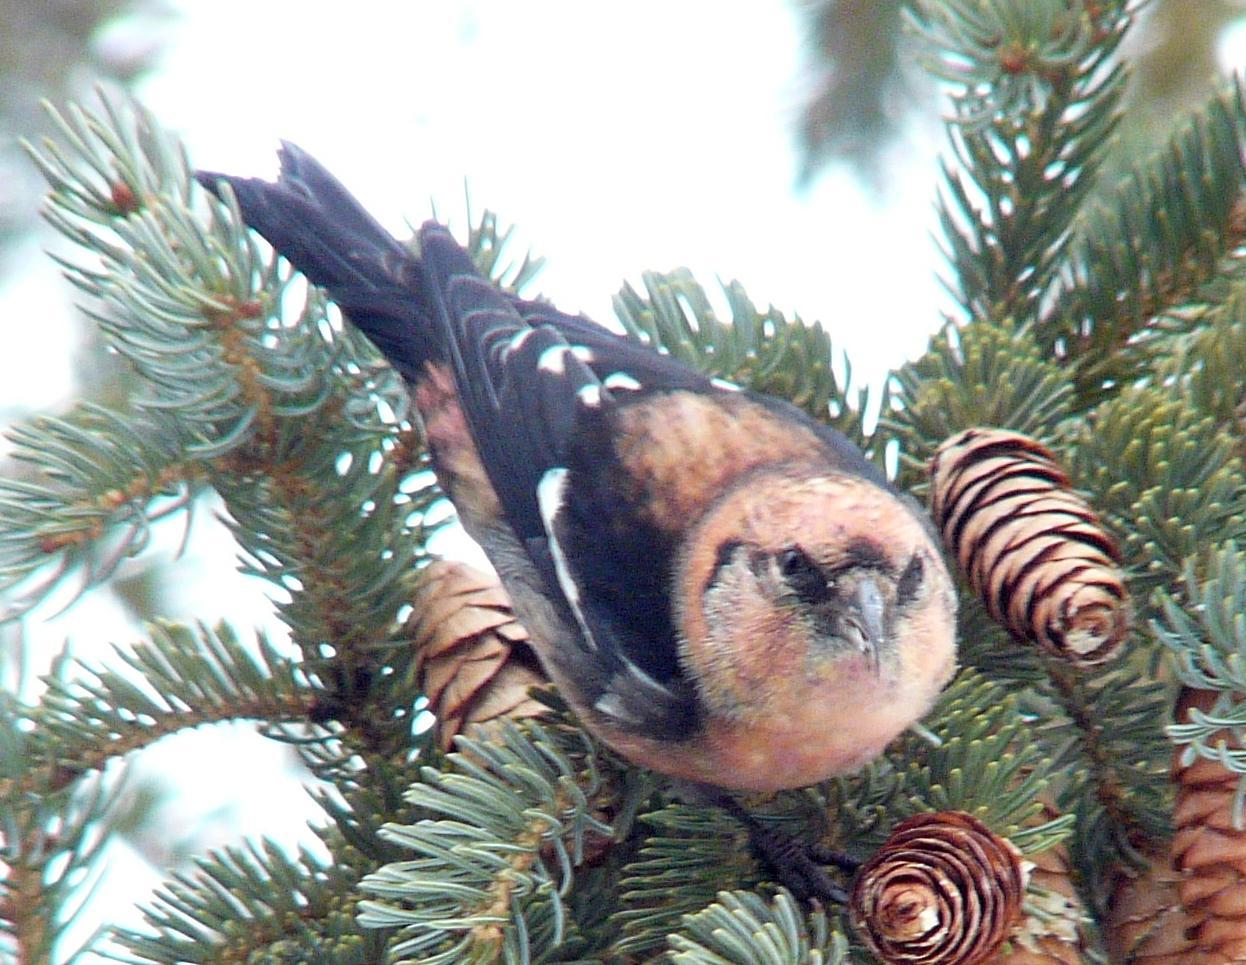 White-winged Crossbill Photo by Bob Neugebauer